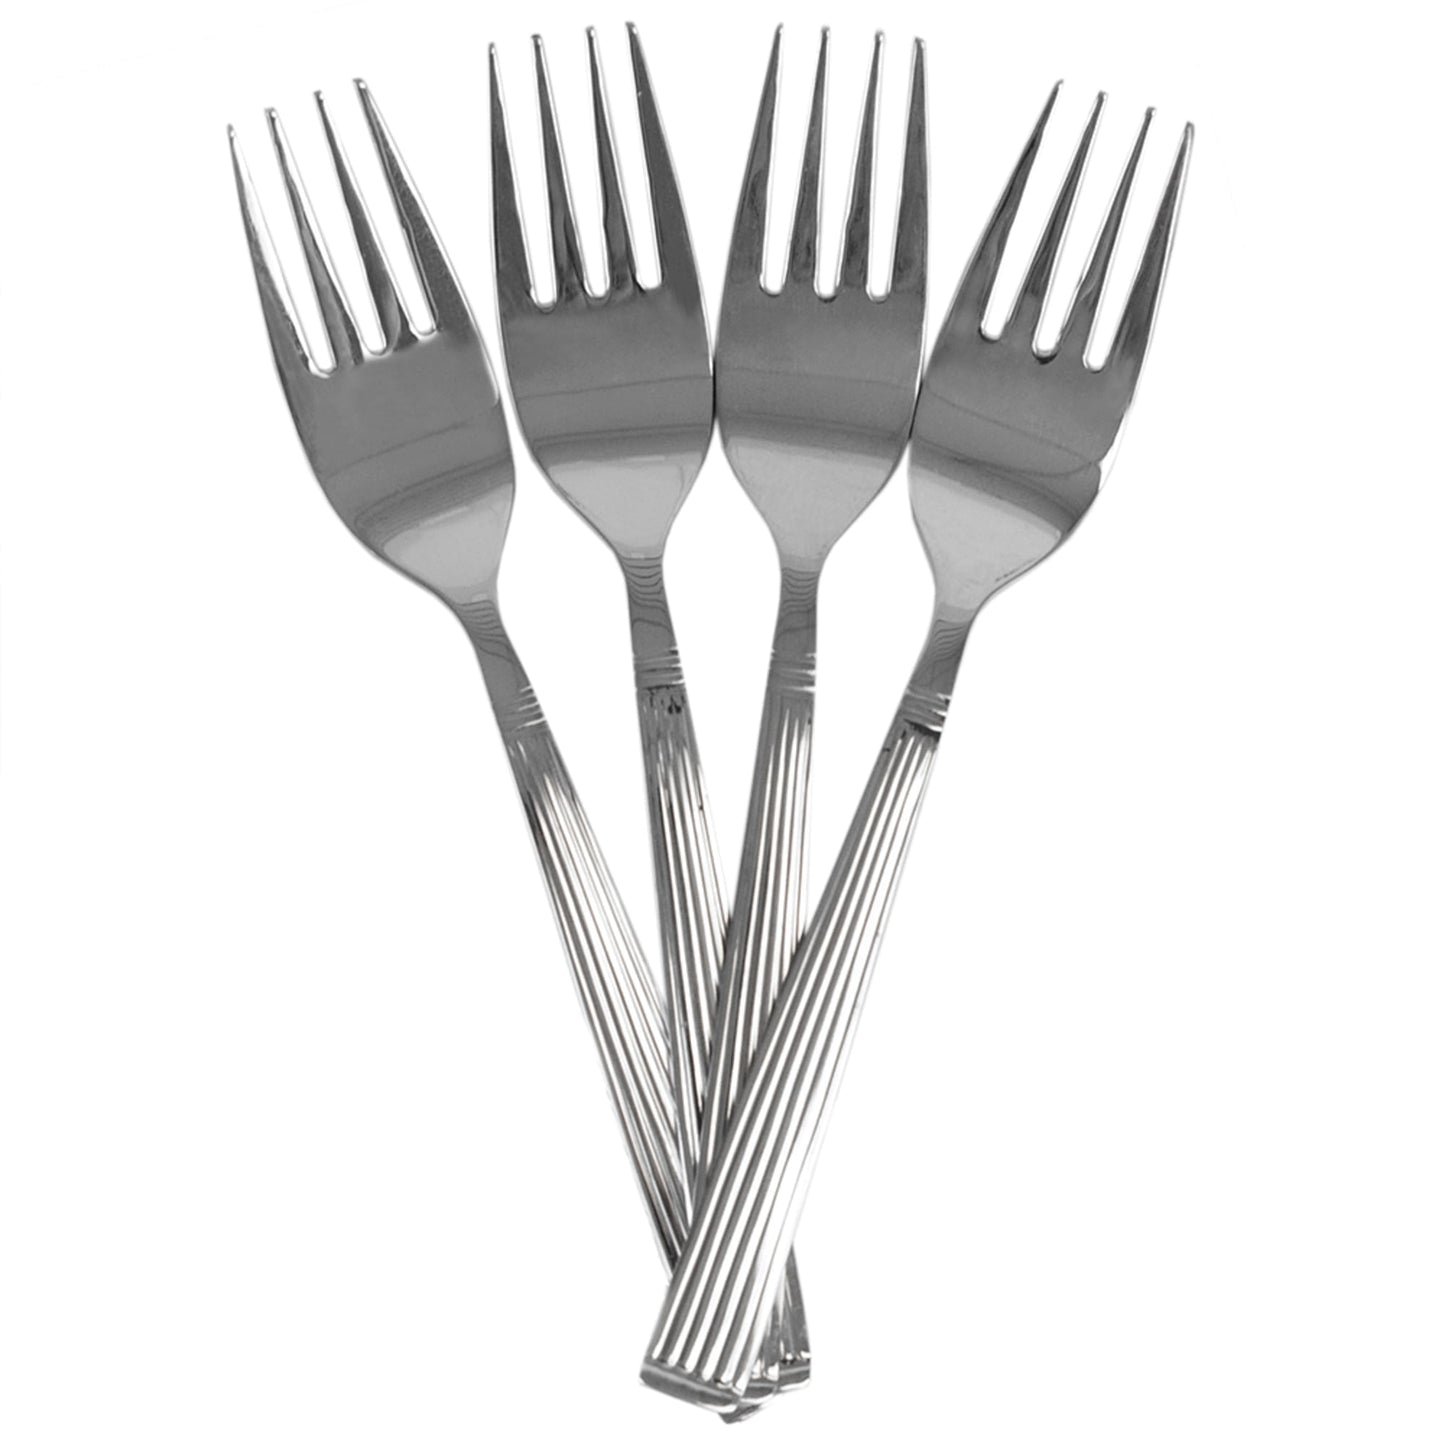 Eternity Mirror Finish 4 Piece Stainless Steel Salad Fork Set, Silver